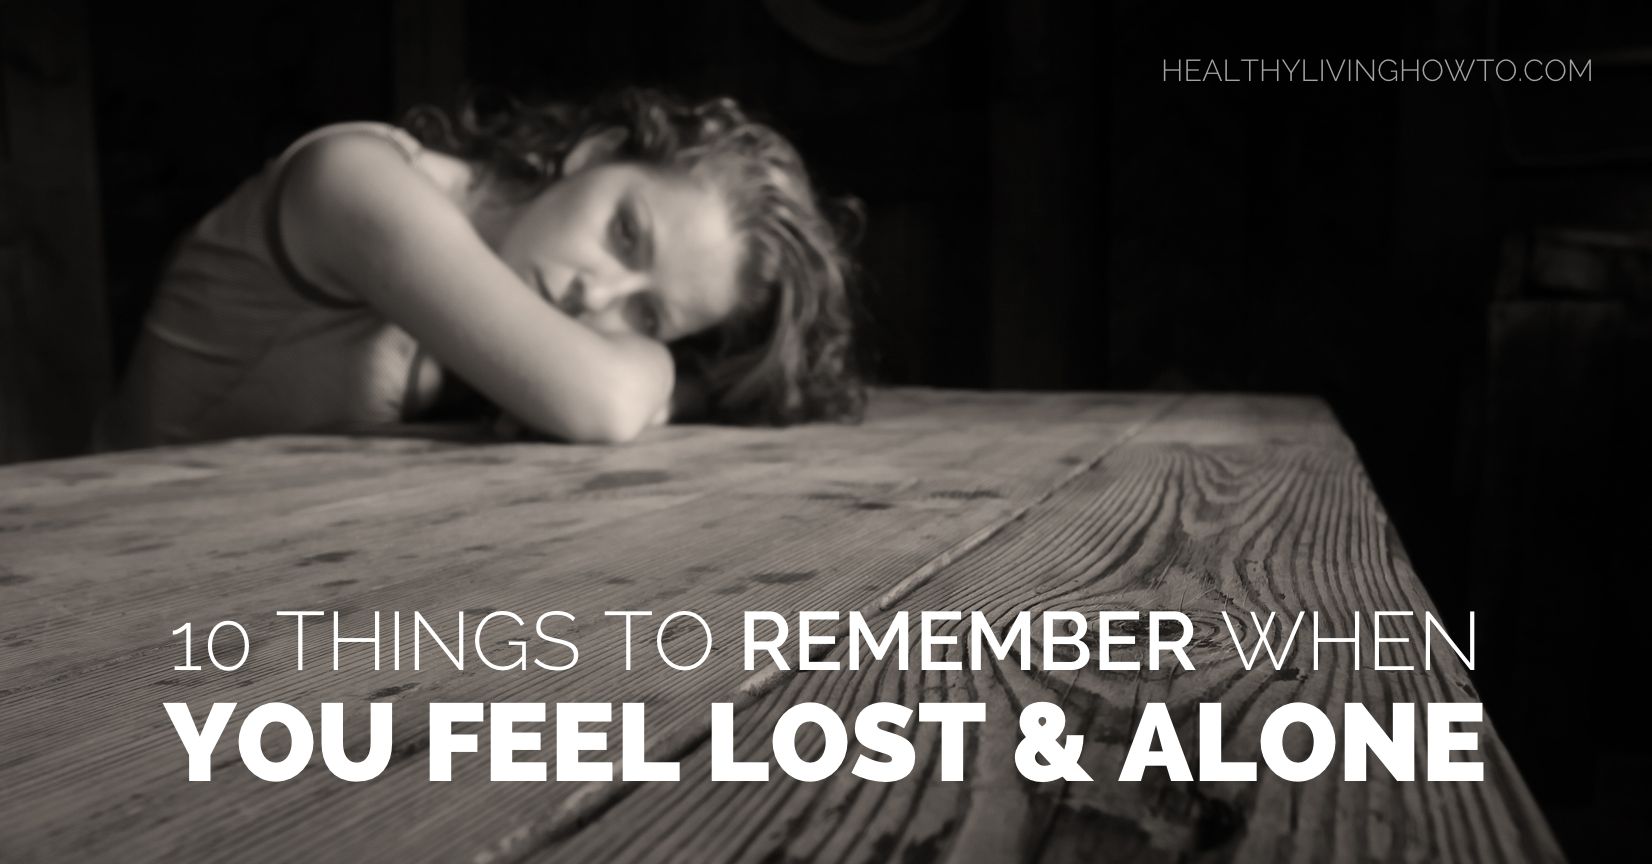 10 Things To Remember When You Feel Lost & Alone | healthylivinghowto.com